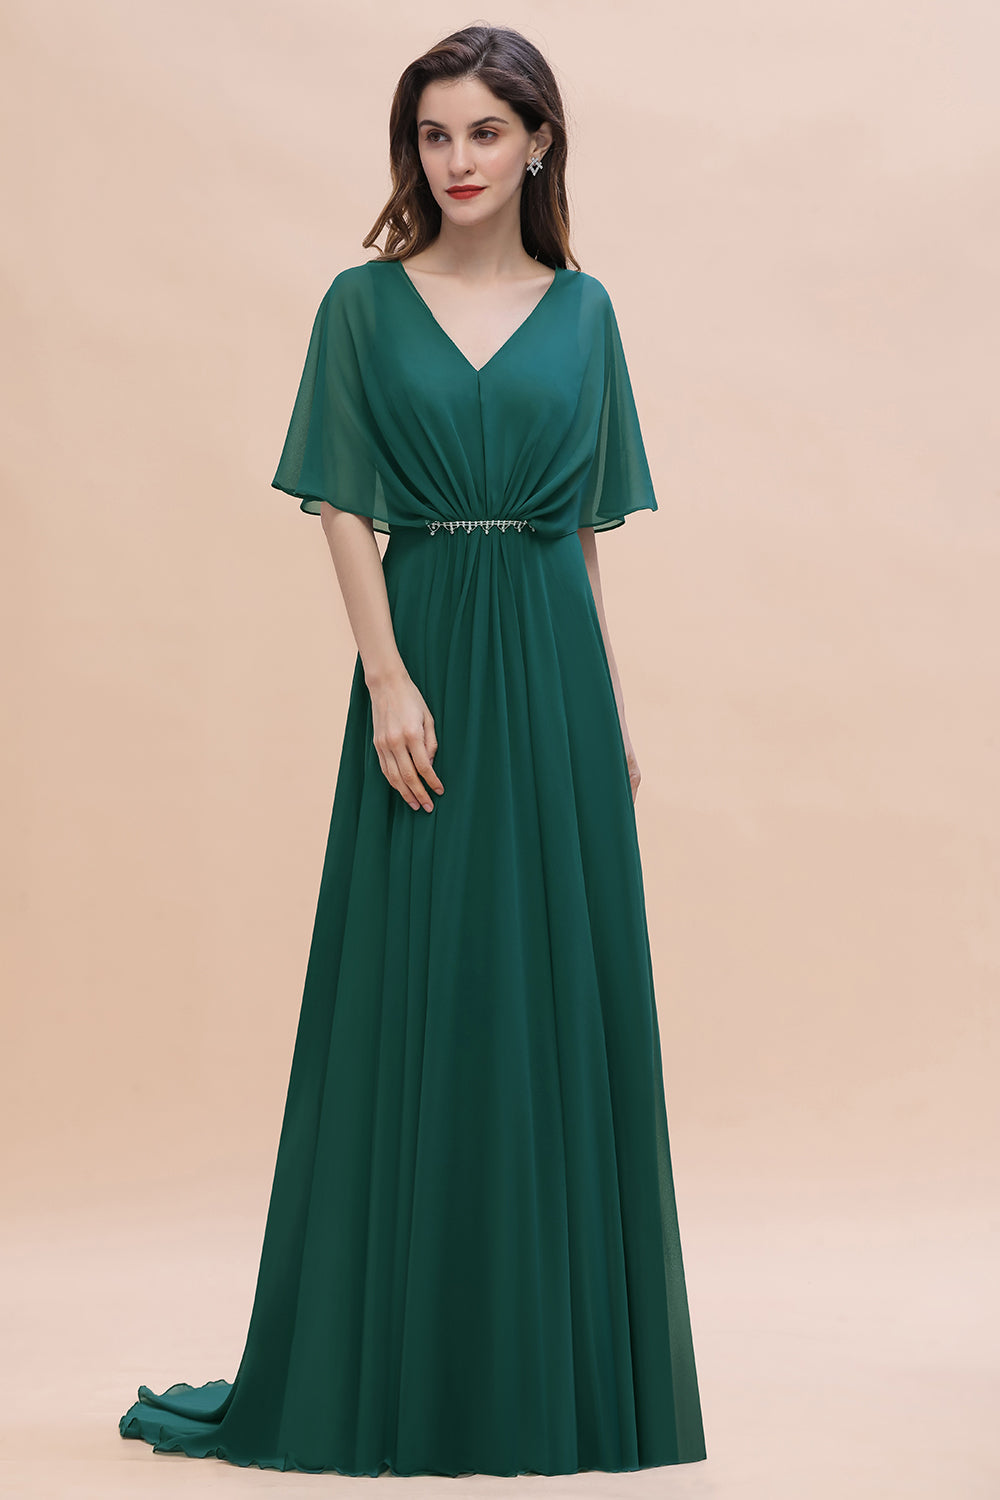 Load image into Gallery viewer, Gorgeous V-Neck Chiffon Ruffles Beading Bridesmaid Dress with Half Sleeves-27dress
